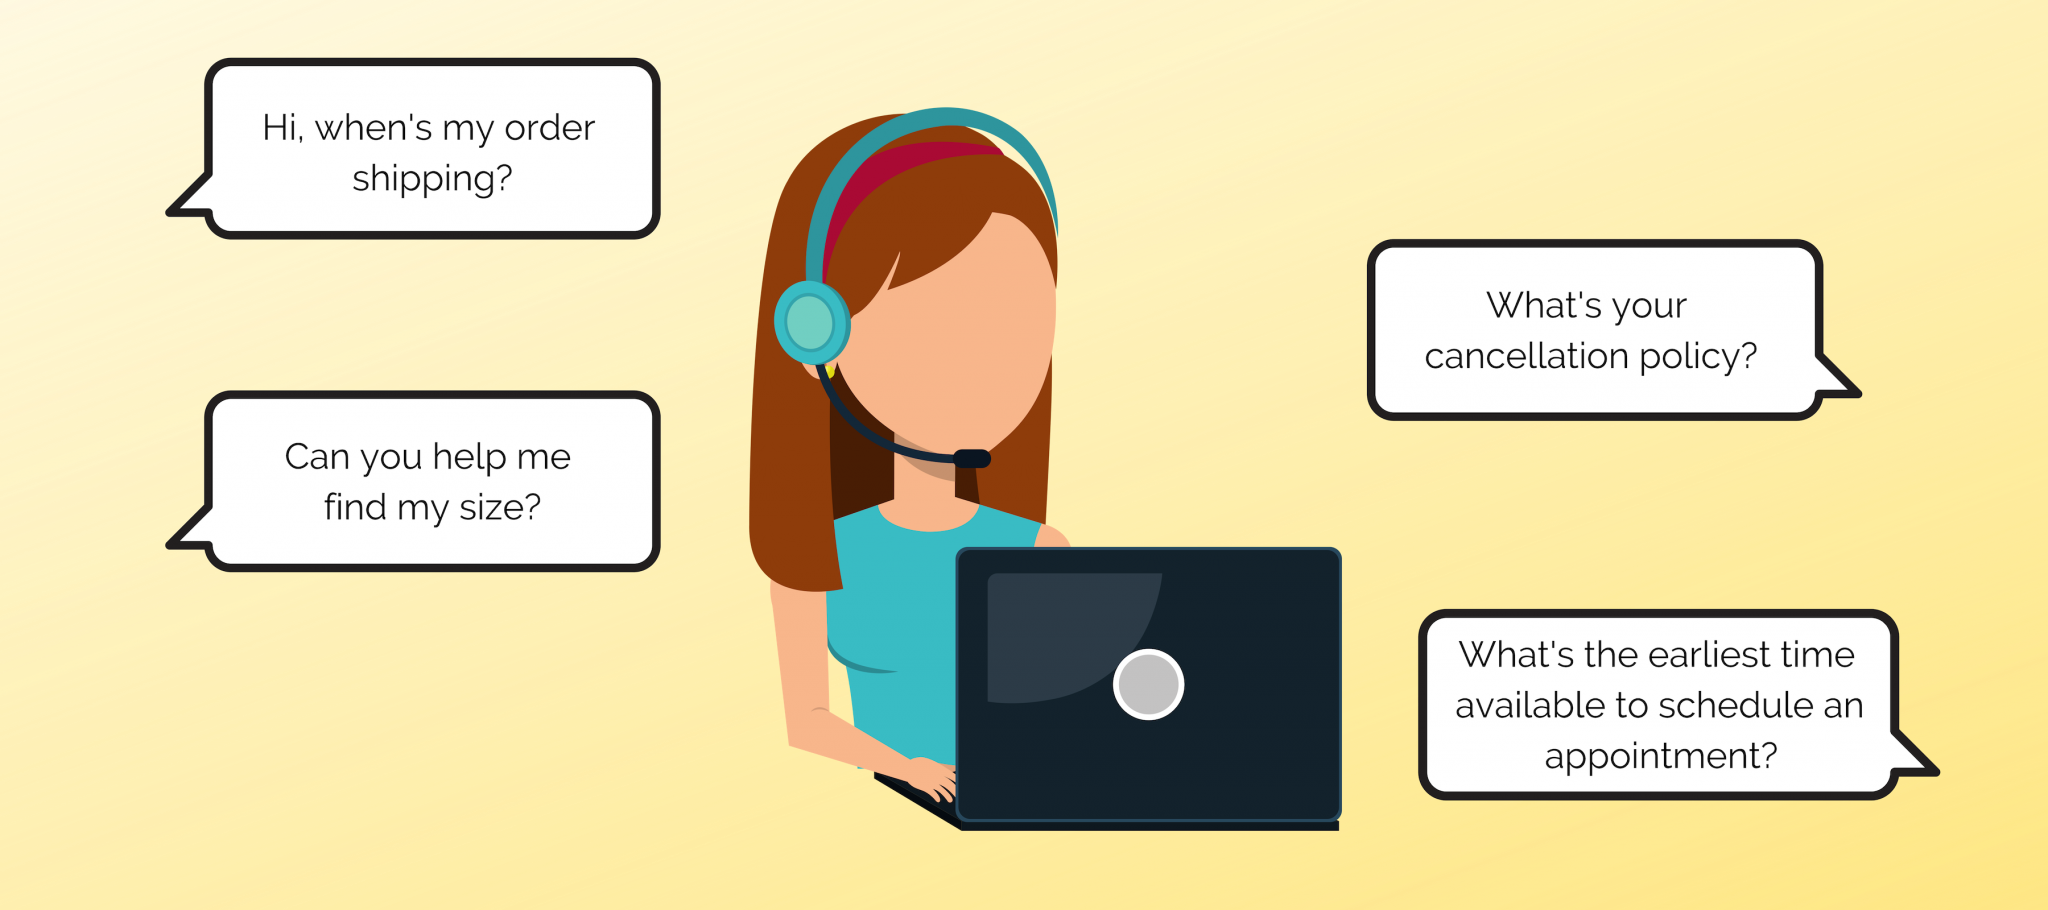 Live chat drives revenue by helping customers in their moment of need